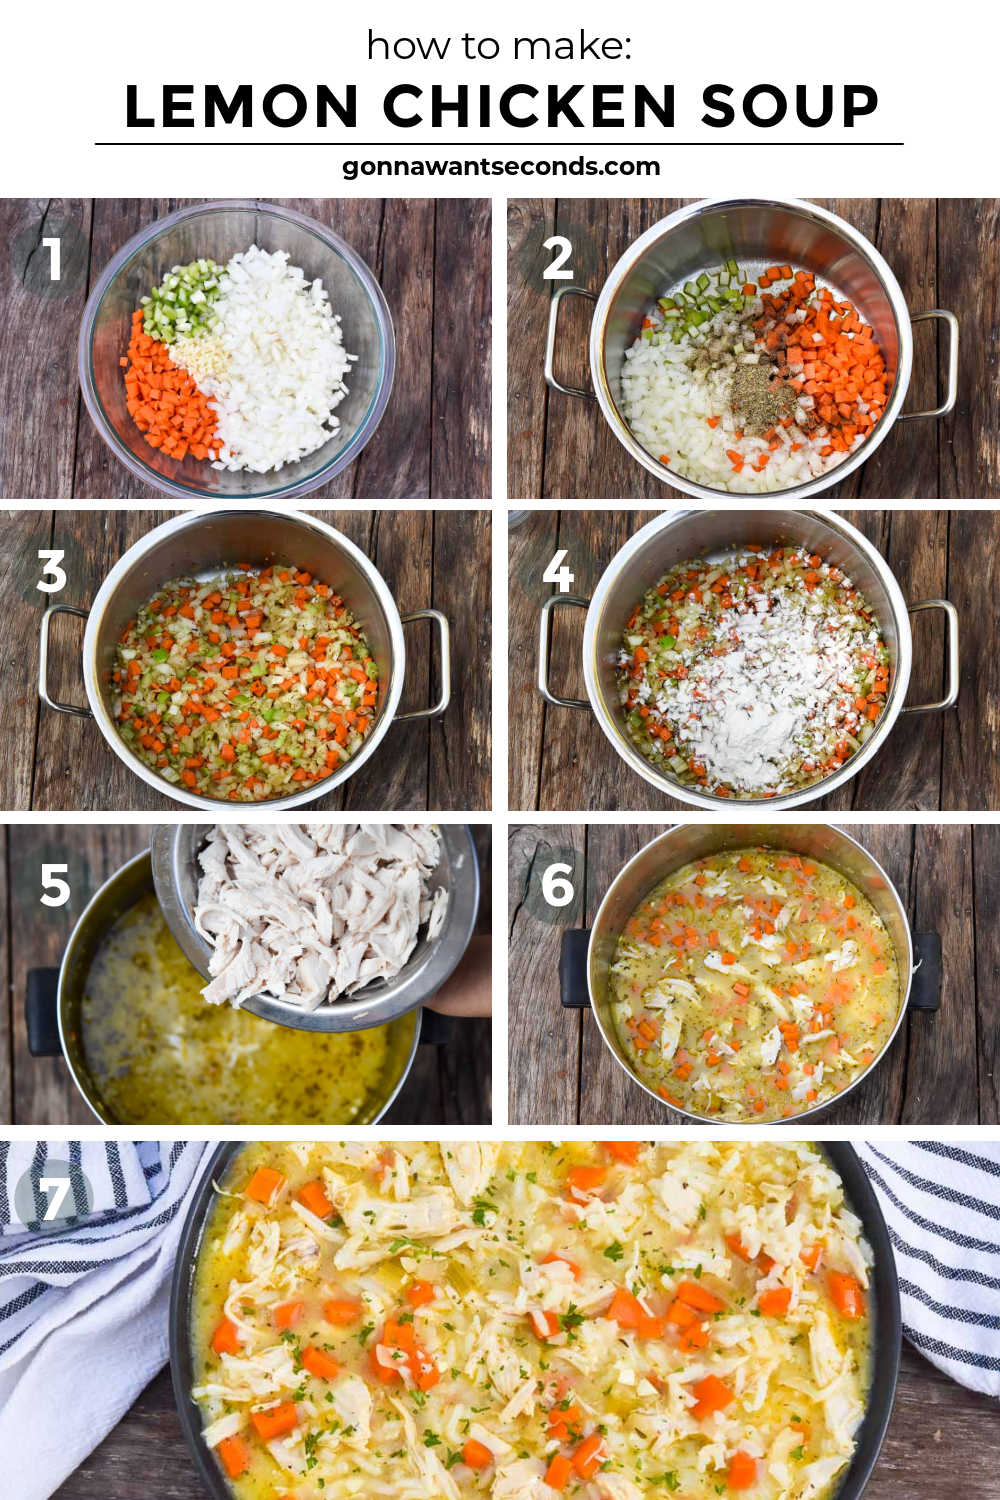 Step by step how to make lemon chicken soup